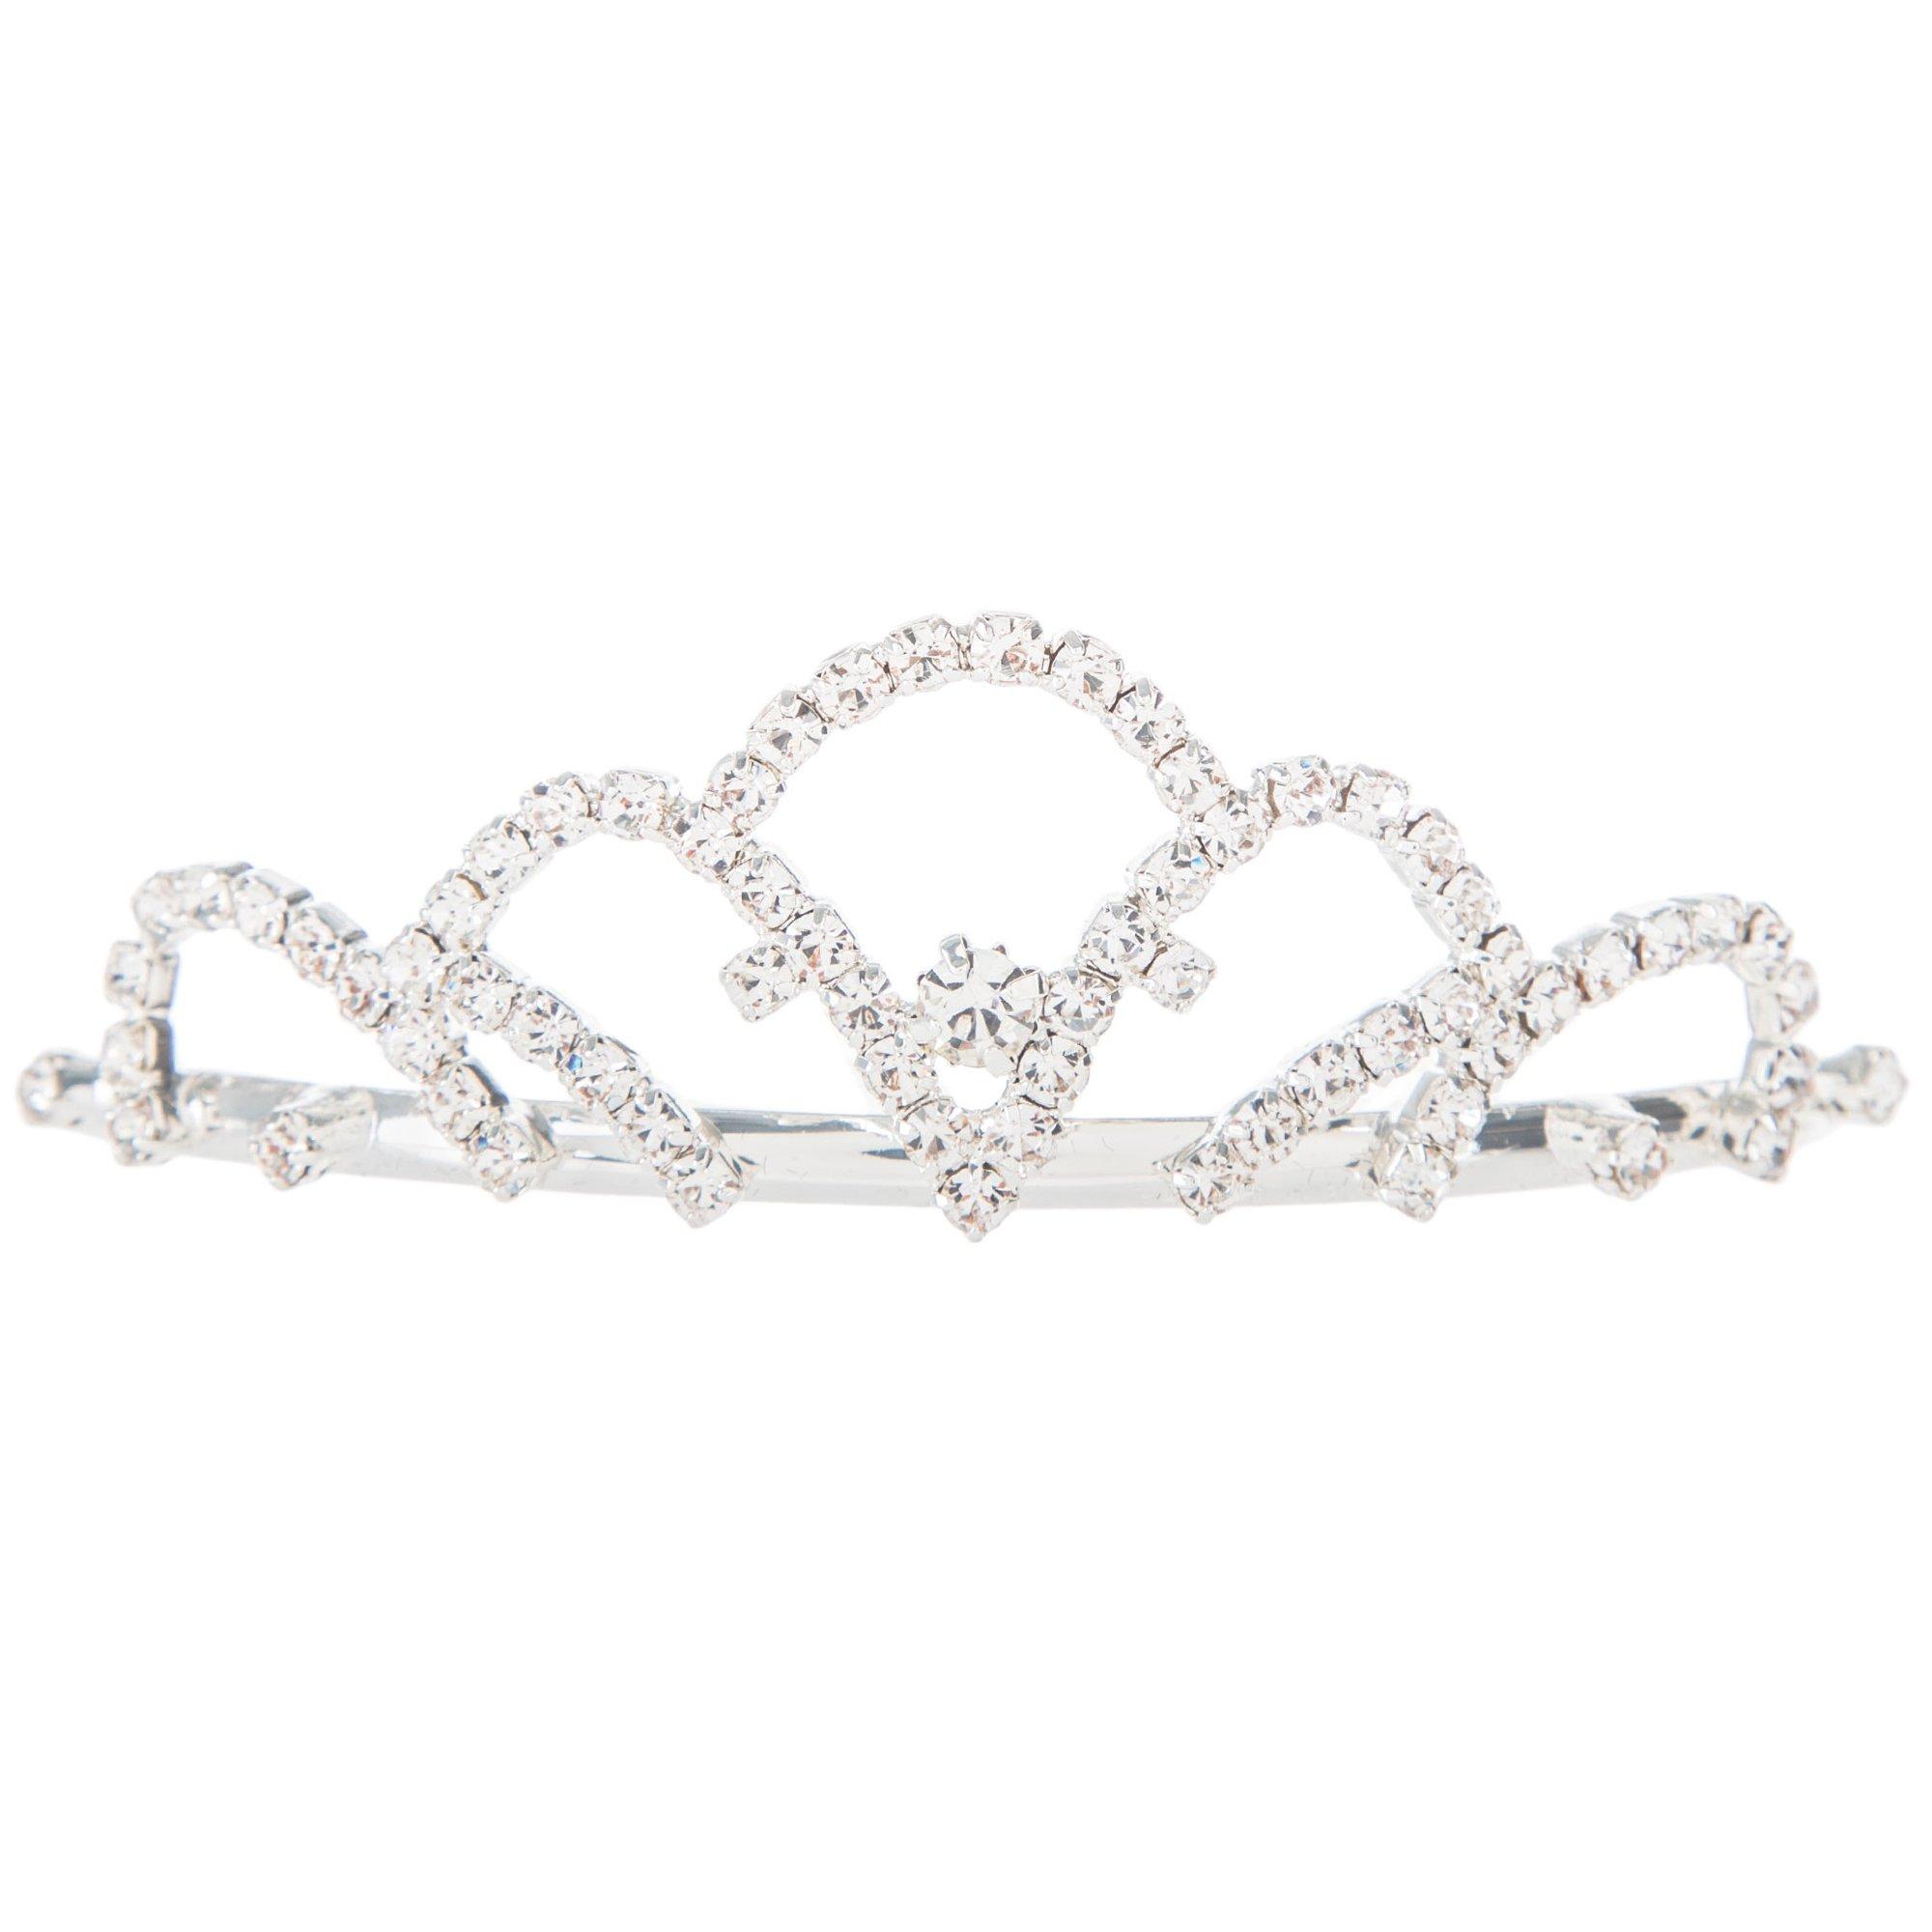 Small Crown Silver Tiaras For Girls Crown Cake Topper Flower Bouquet Party